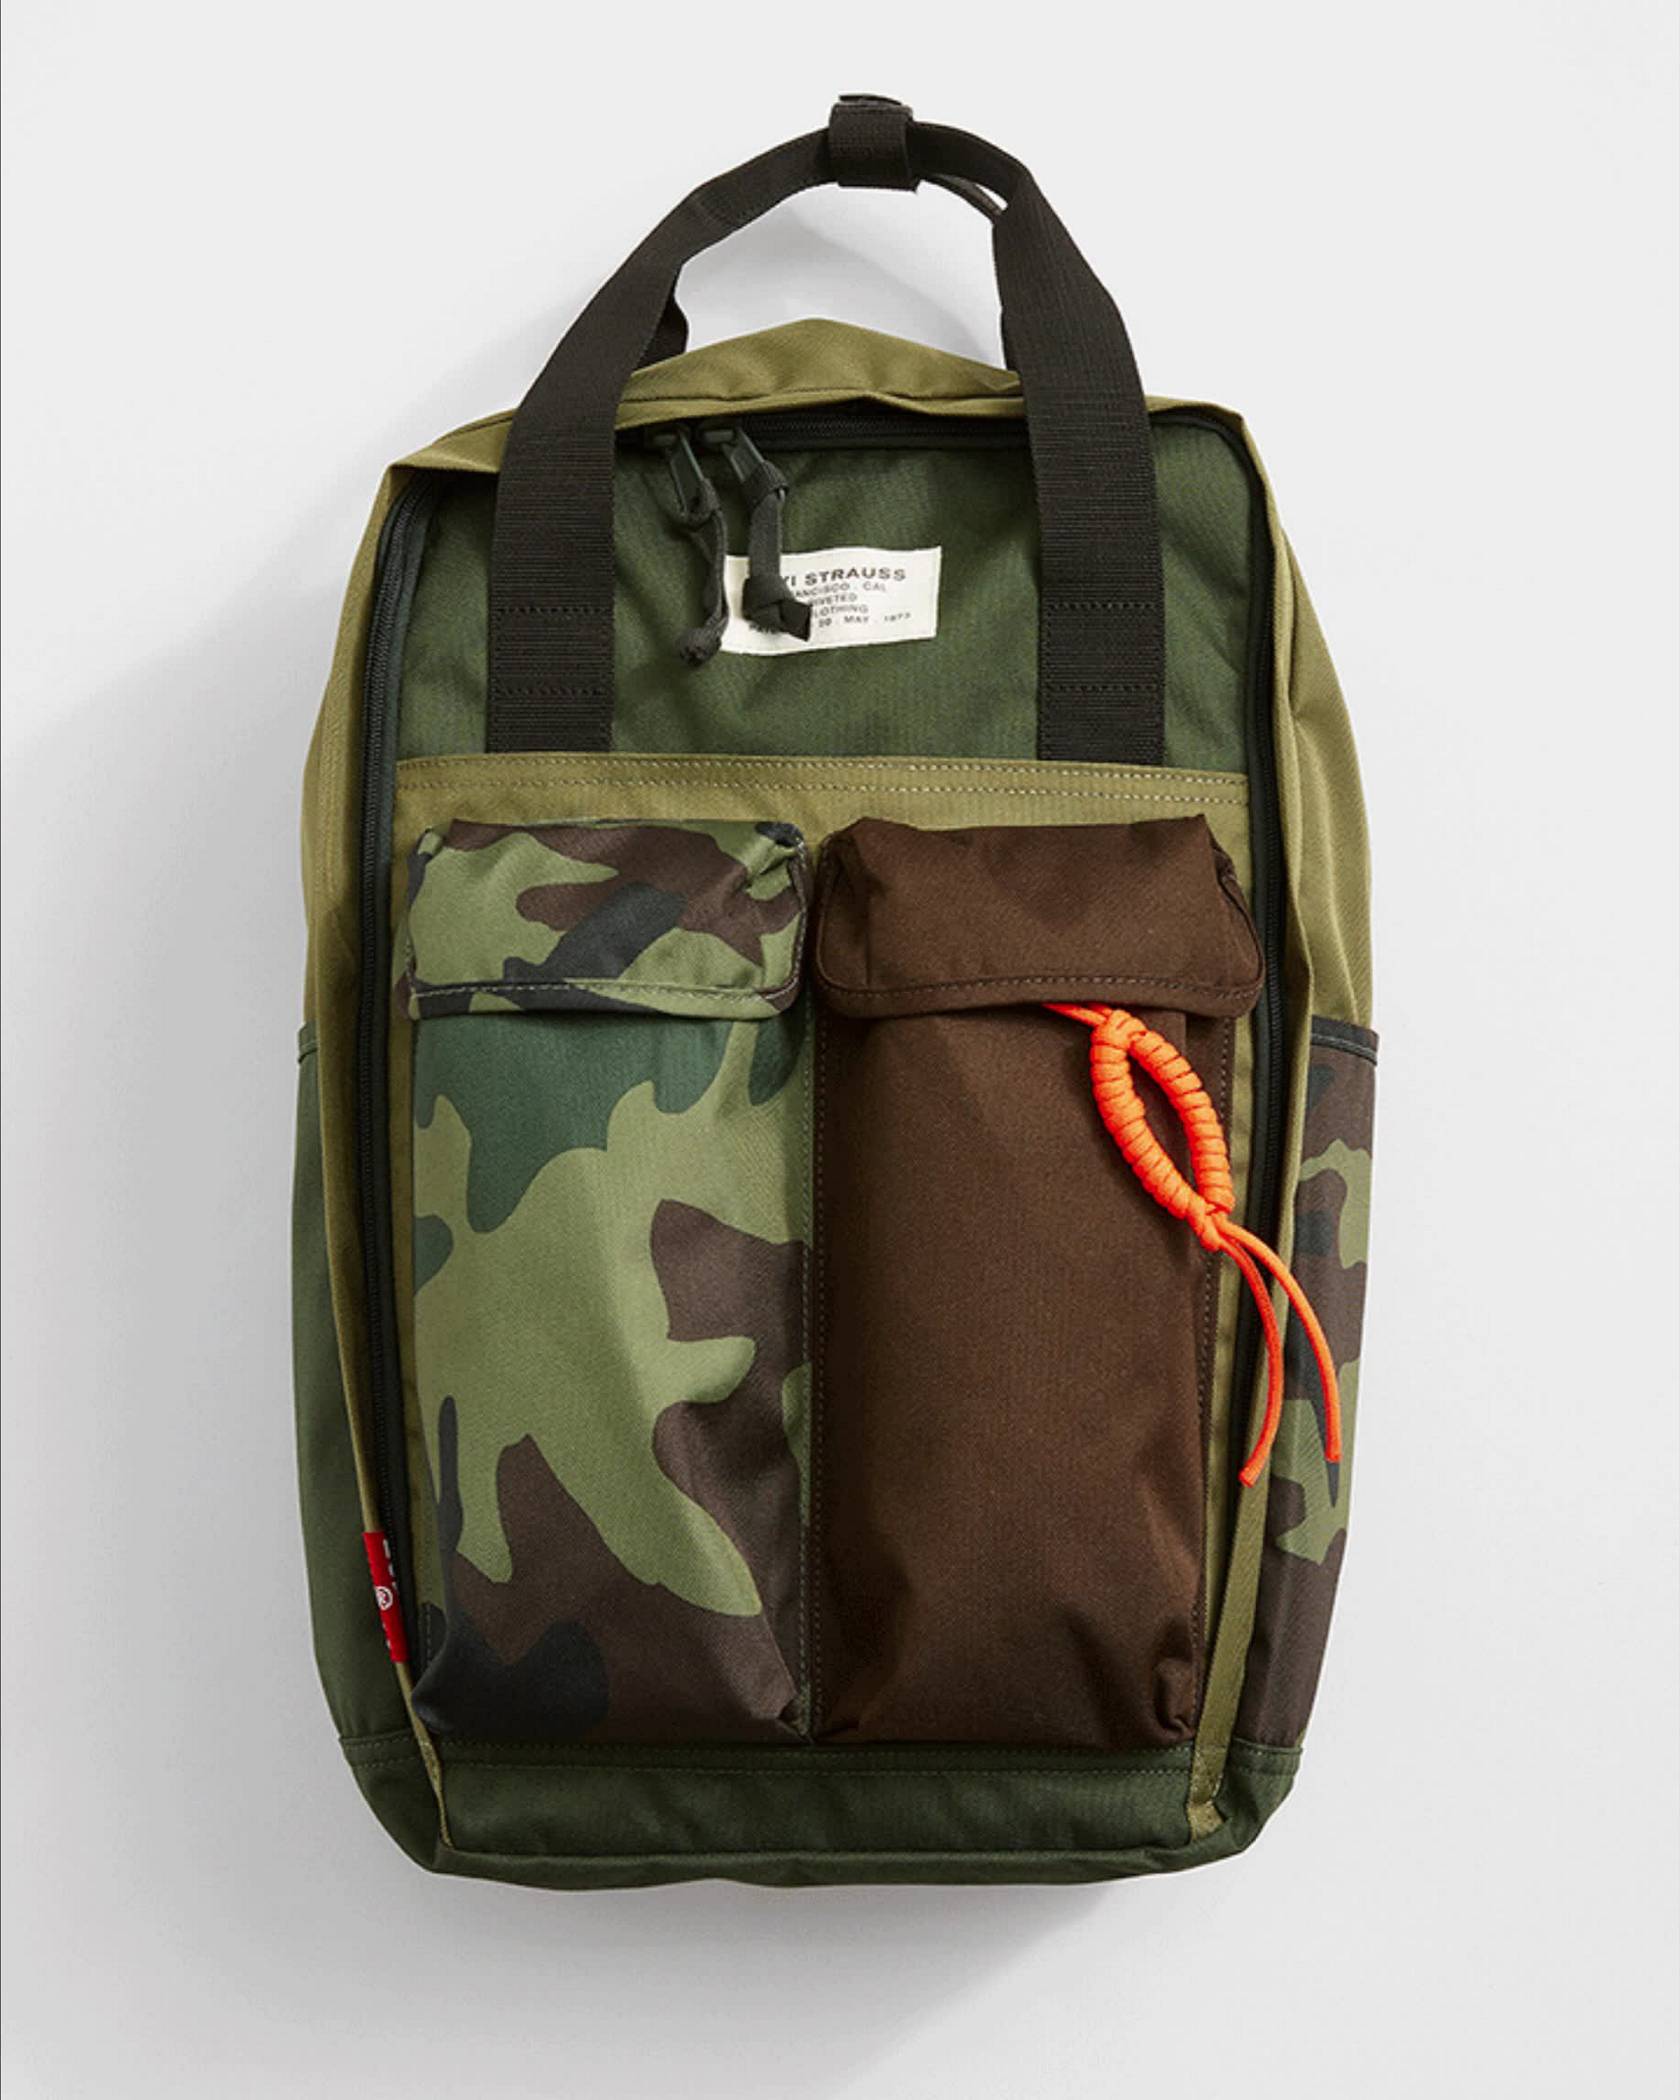 Camo backpack with red strap, gif